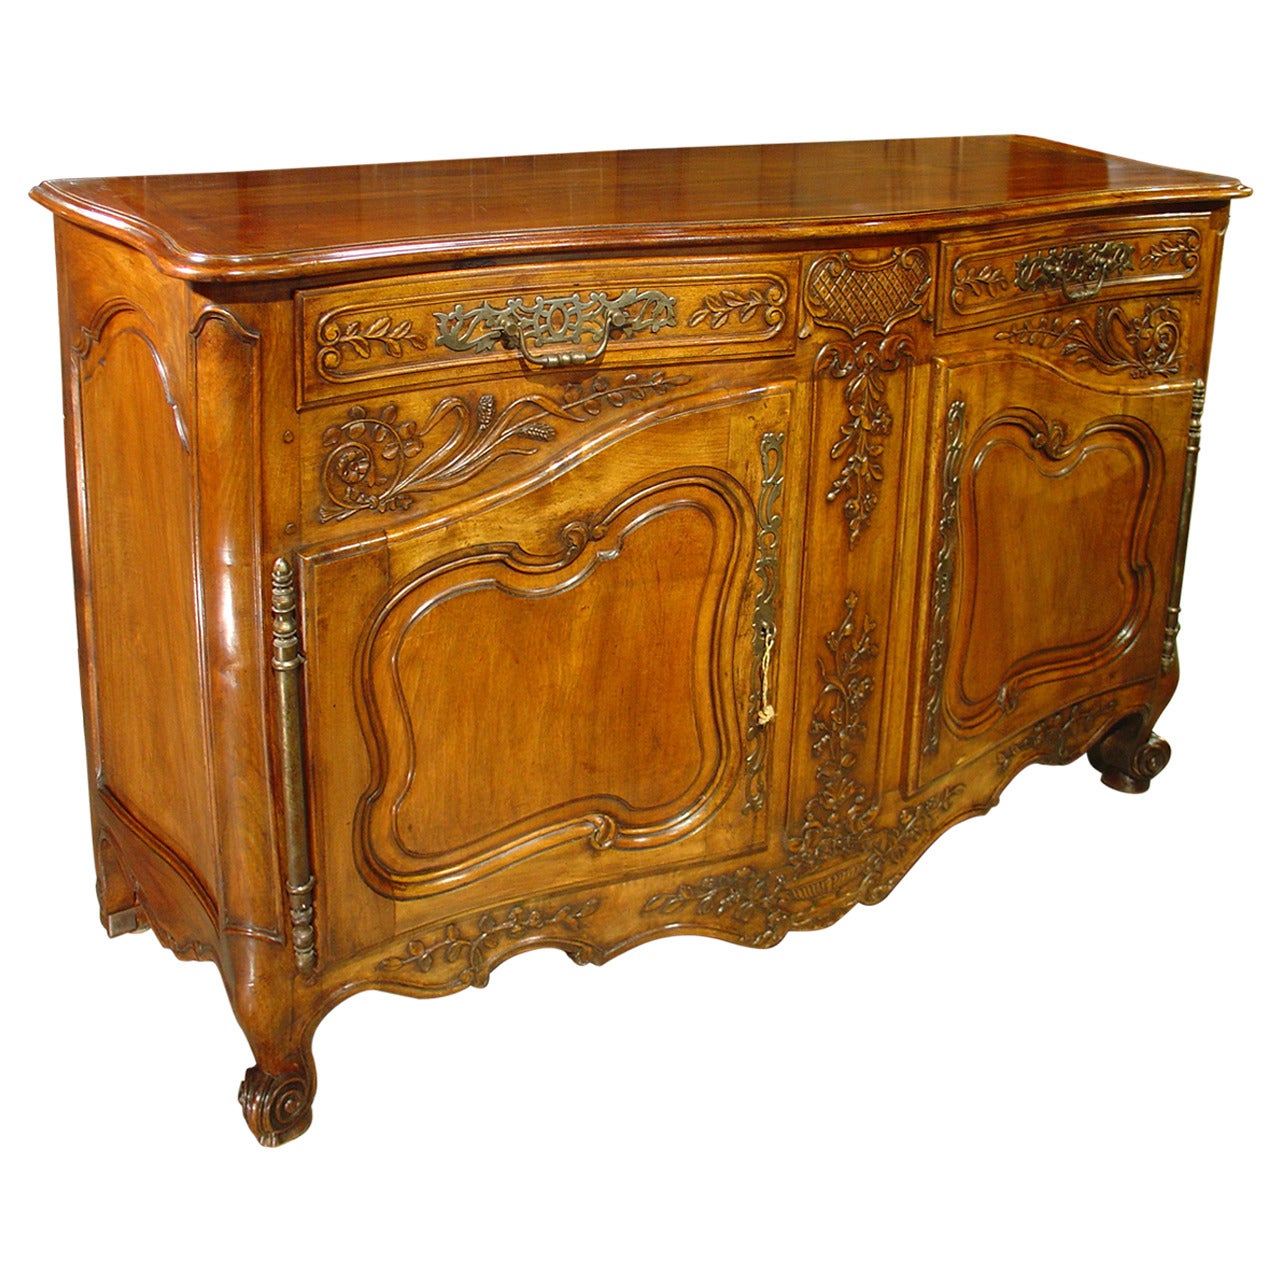 A Large 19th Century Walnut Wood Buffet from Provence, France